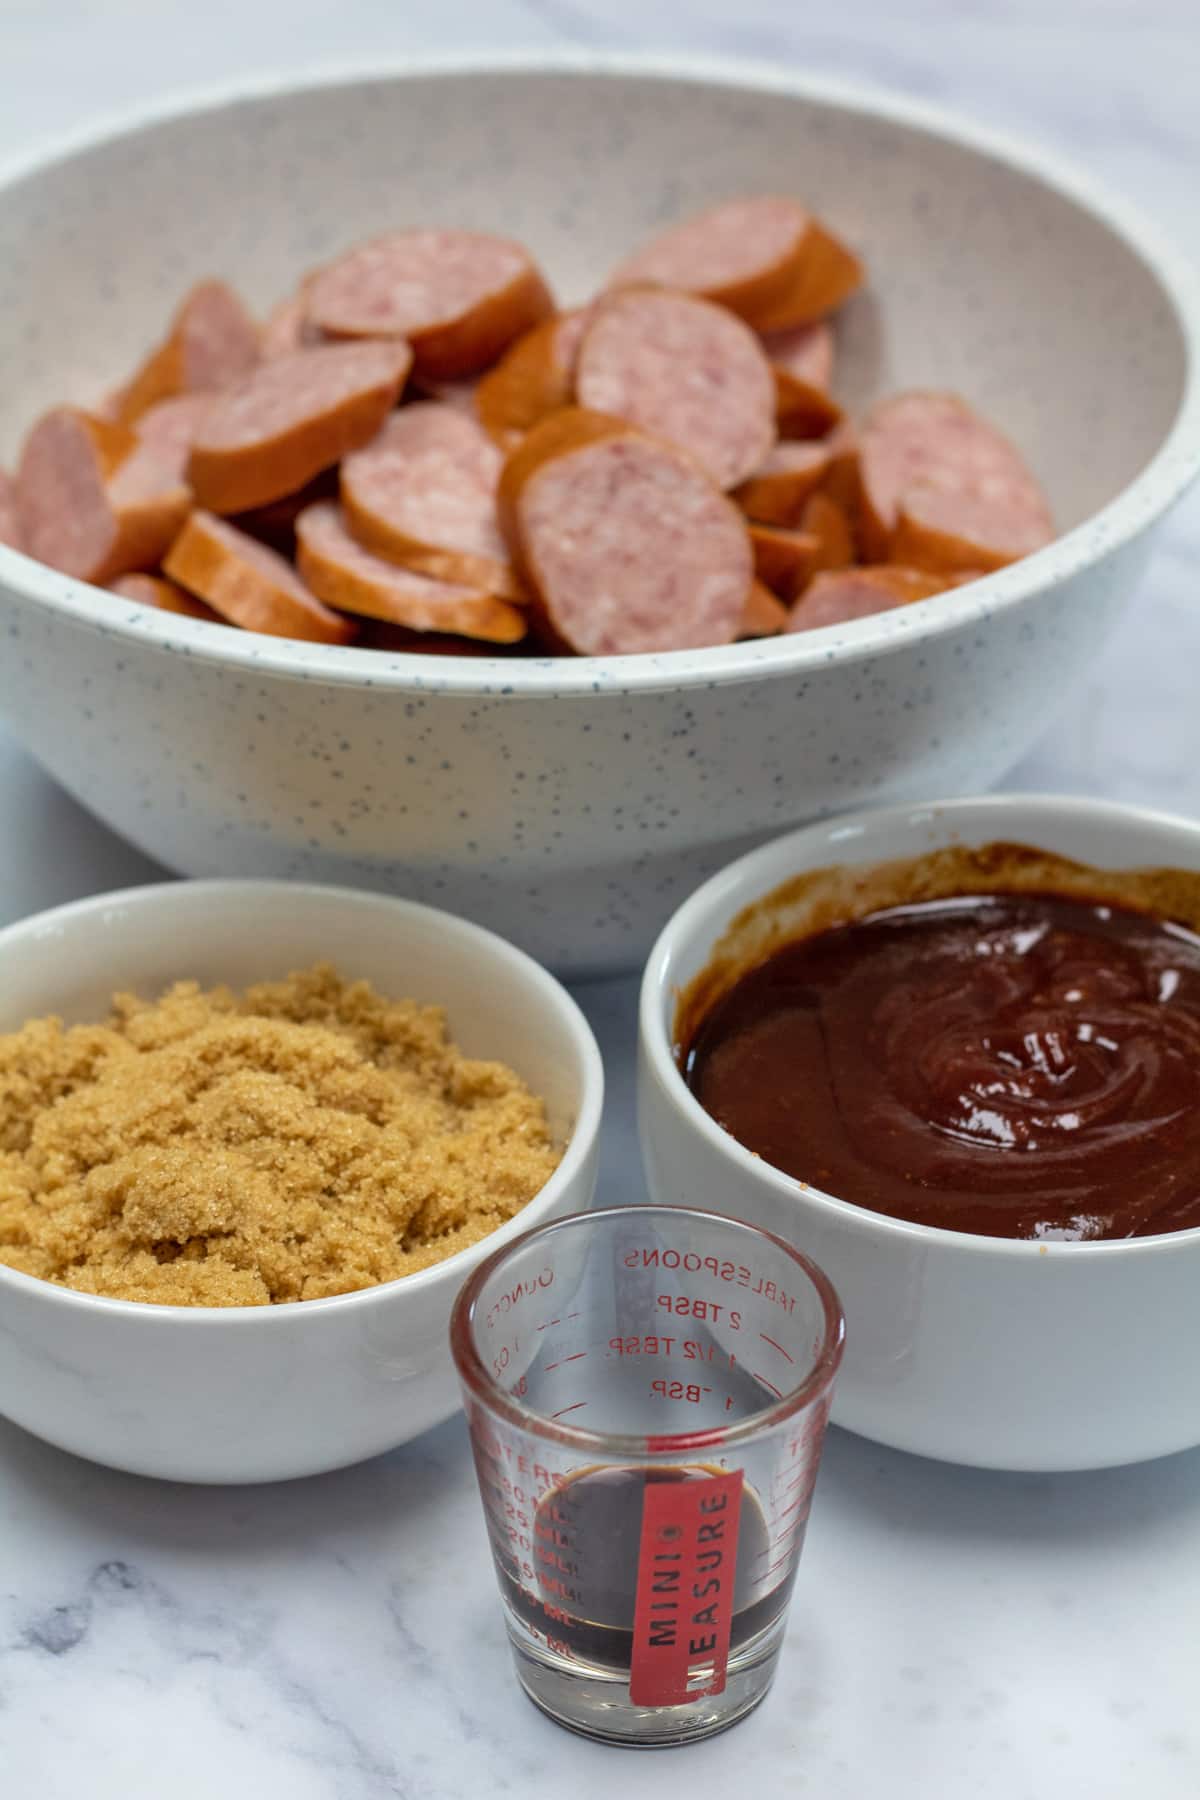 Photo showing ingredients needed for baked bbq sausages.